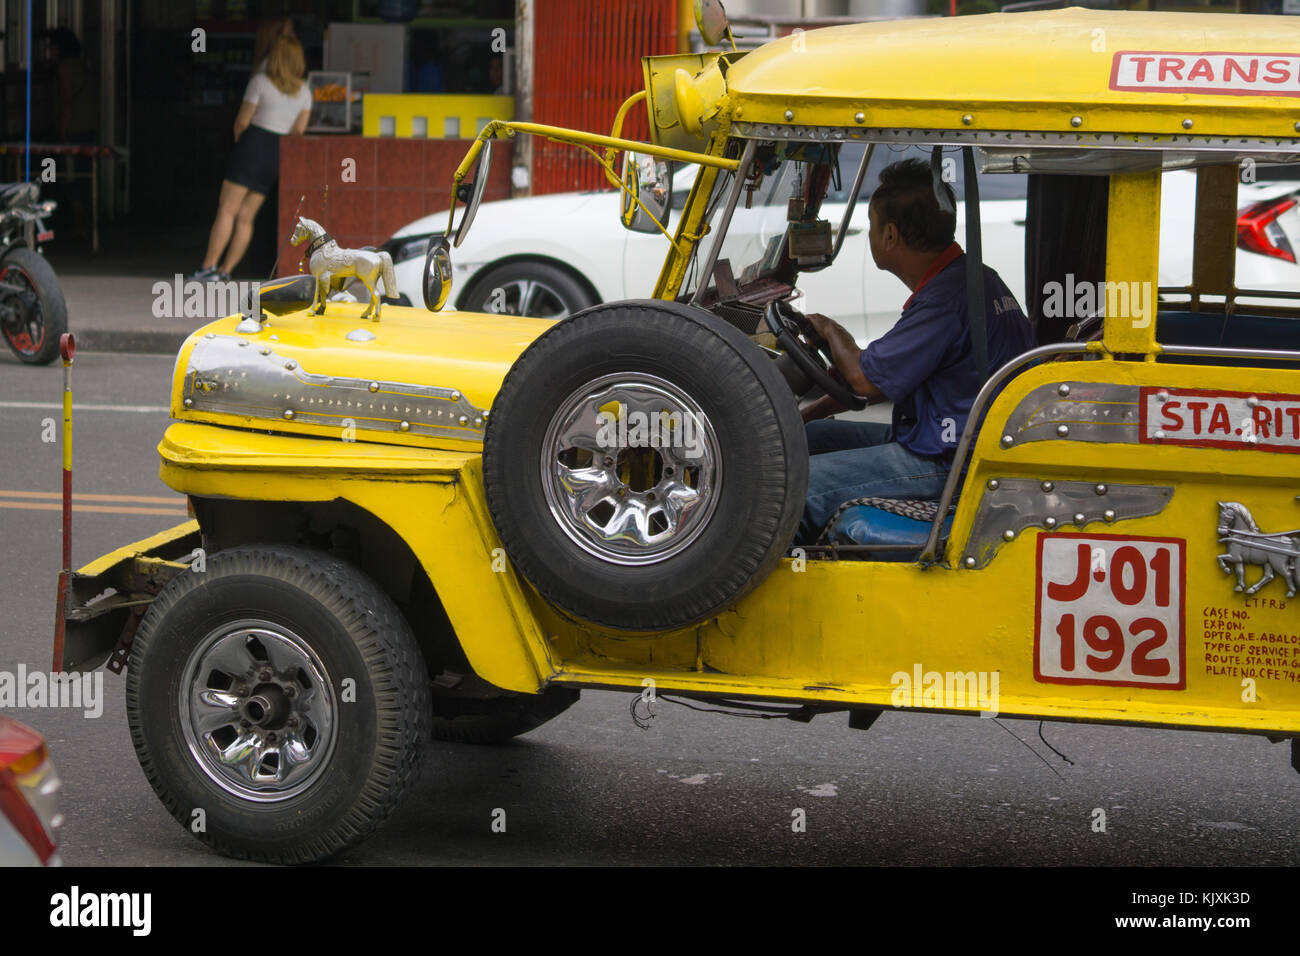 A yellow Public Utility Jeepney Vehicle being driven in Olongapo City,Bataan,Philippines Stock Photo